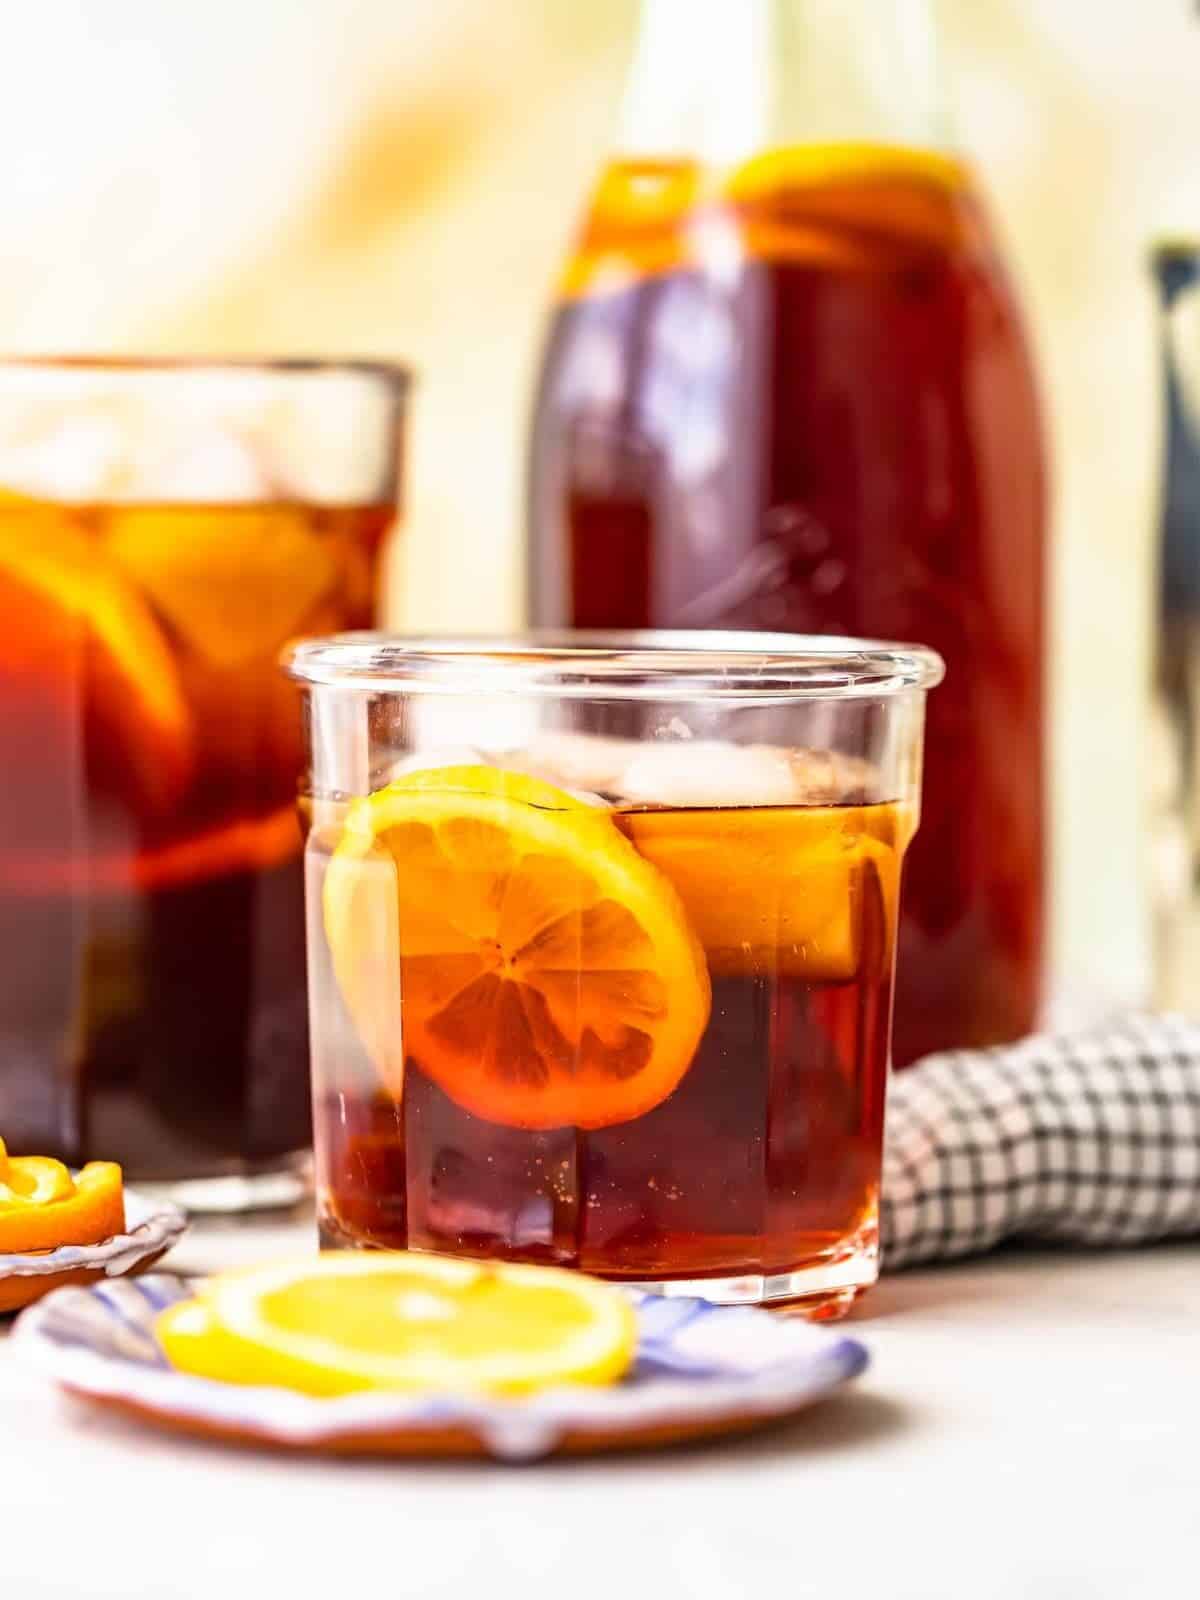 Homemade sweet tea served in a glass with a lemon slice.